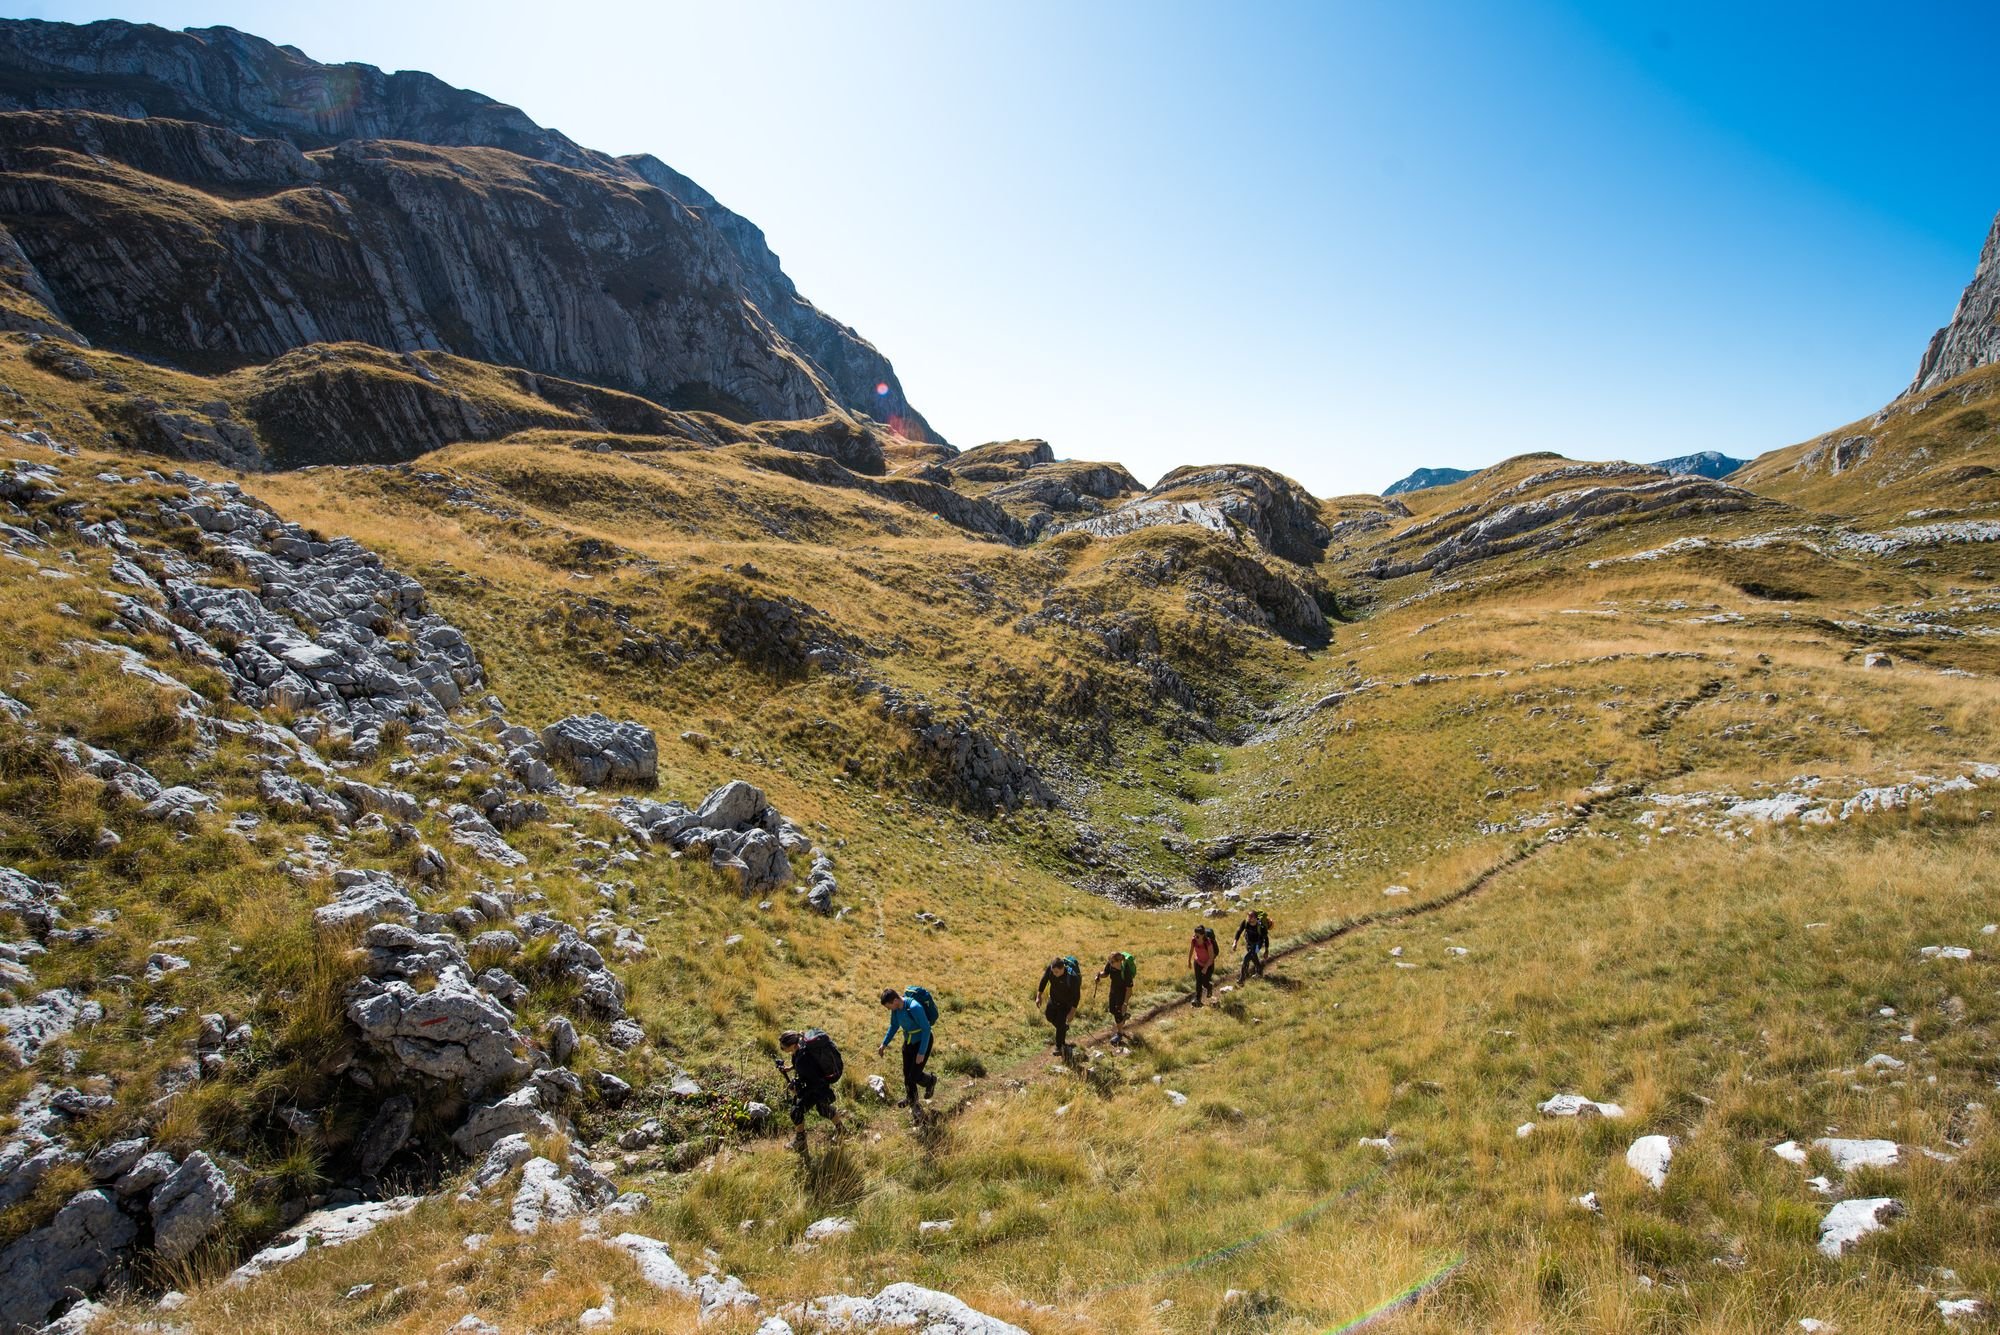 A group of hikers spread out in Montenegro, on a scenic mountain pass